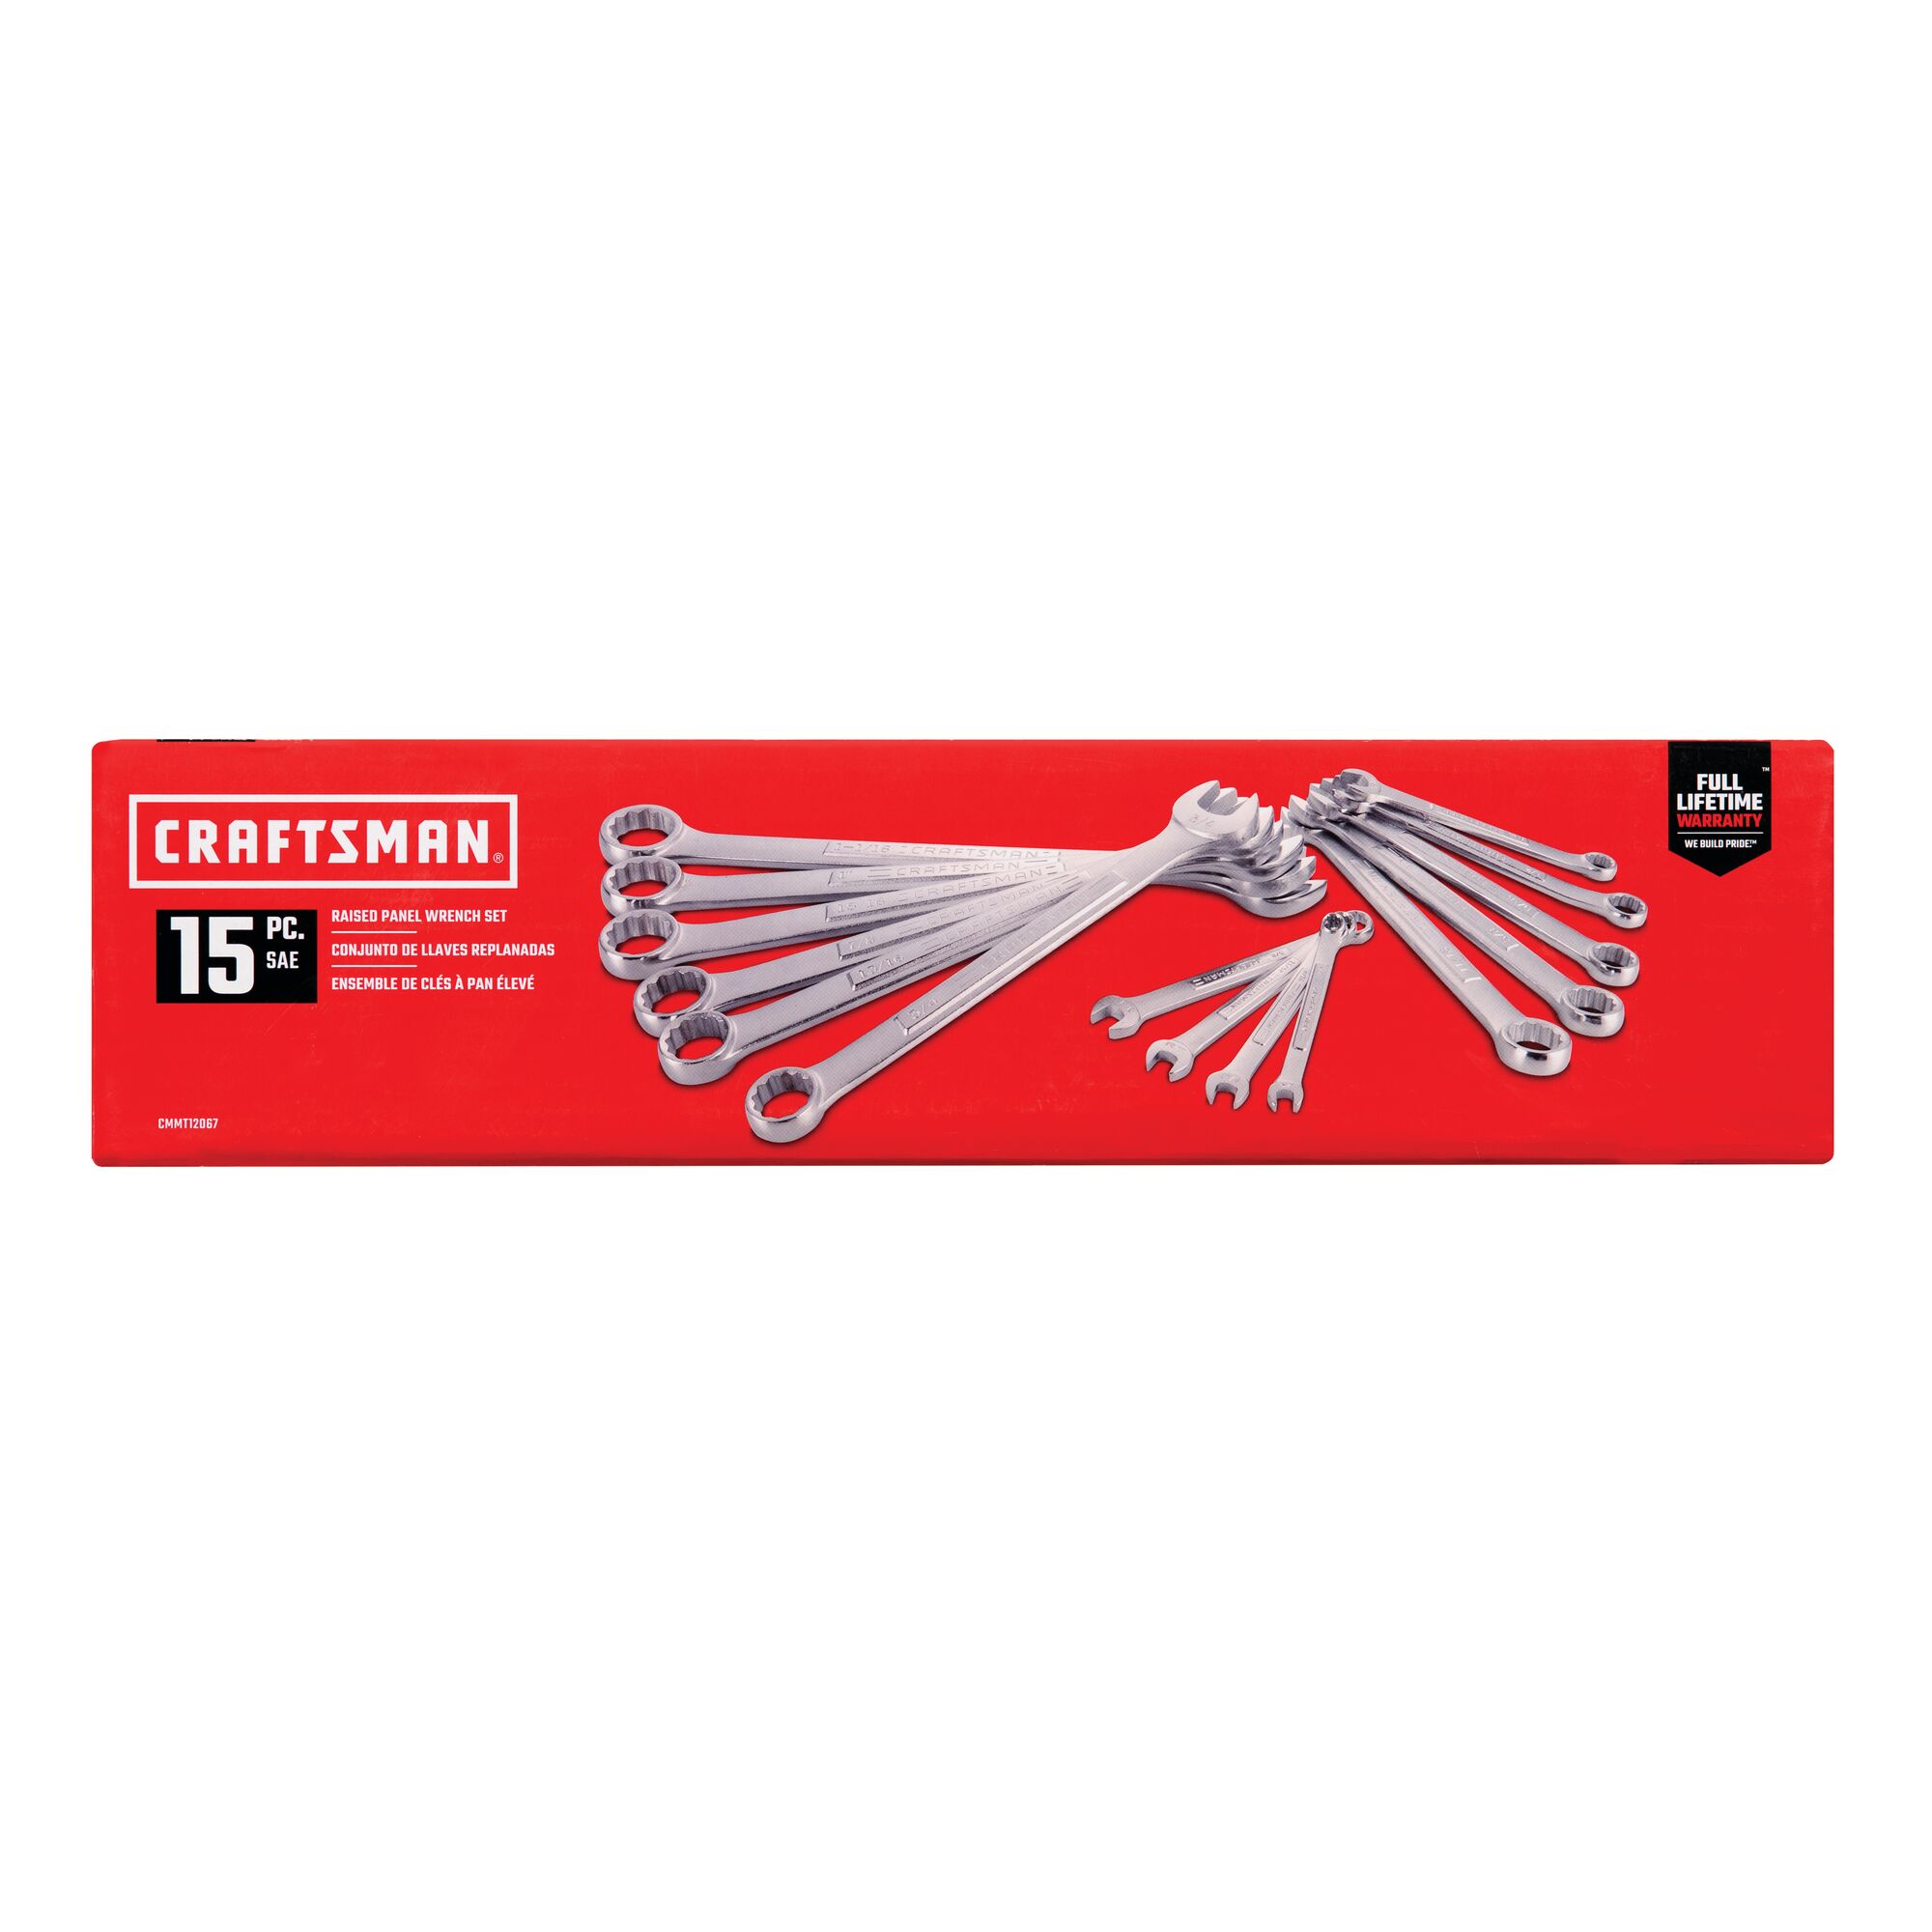 15 piece s a e combination wrench set in cardboard box.